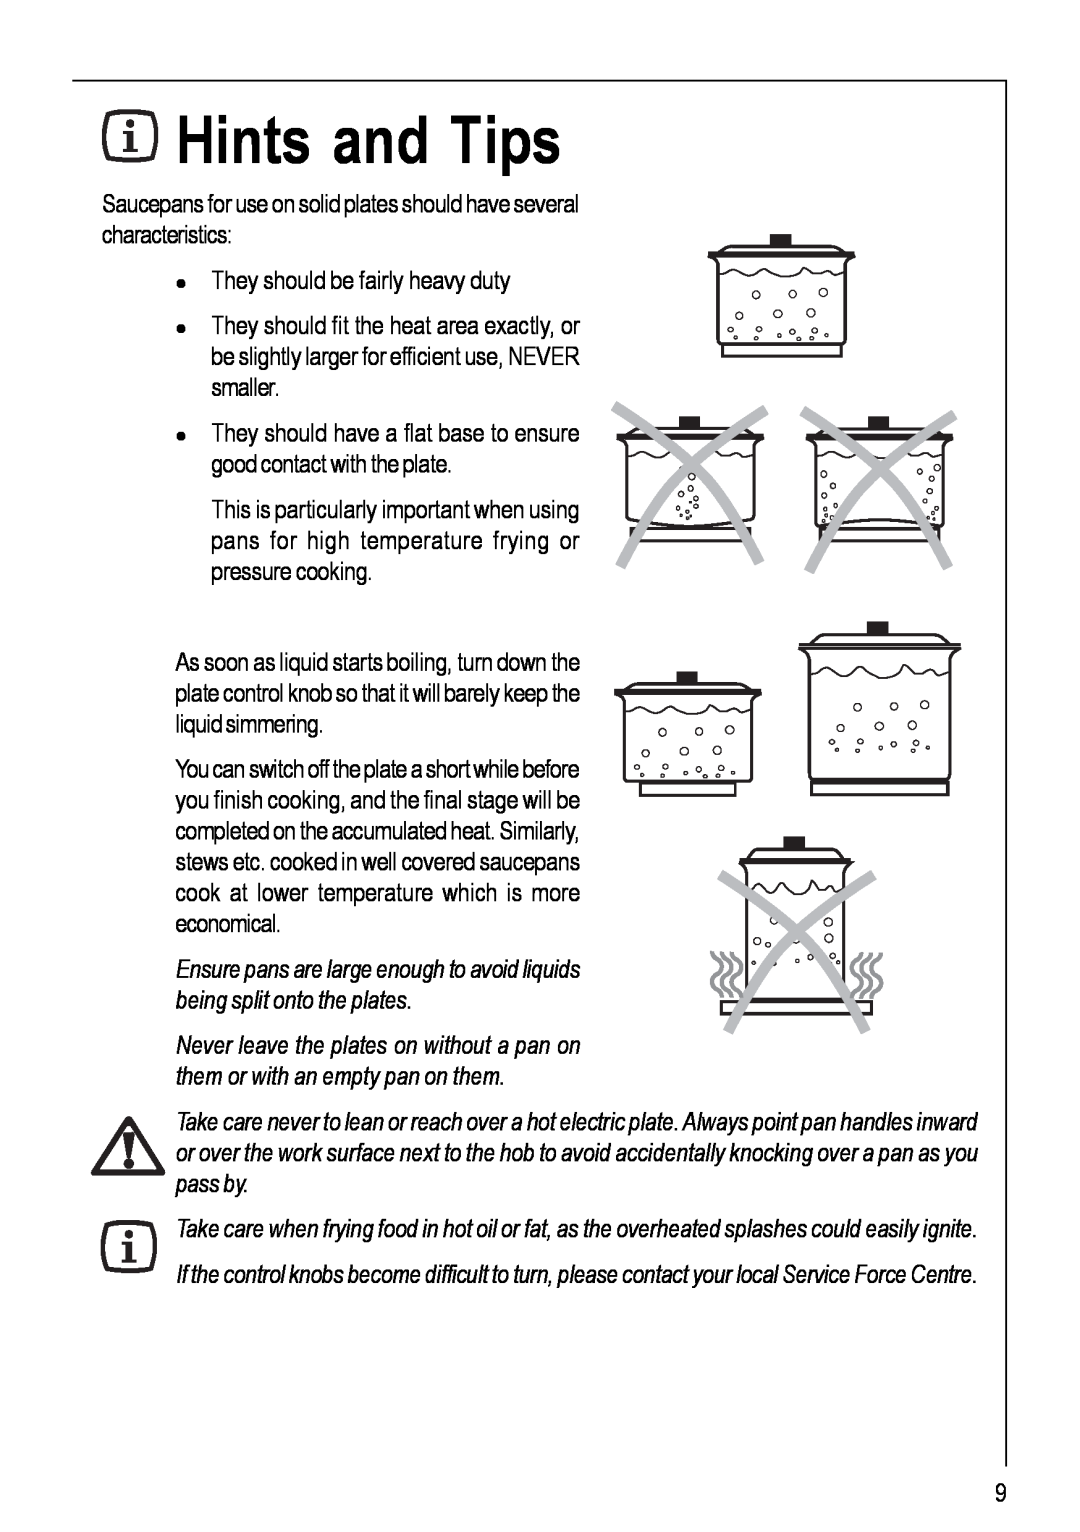 Electrolux 116 K Hints and Tips, Saucepans for use on solid plates should have several characteristics 